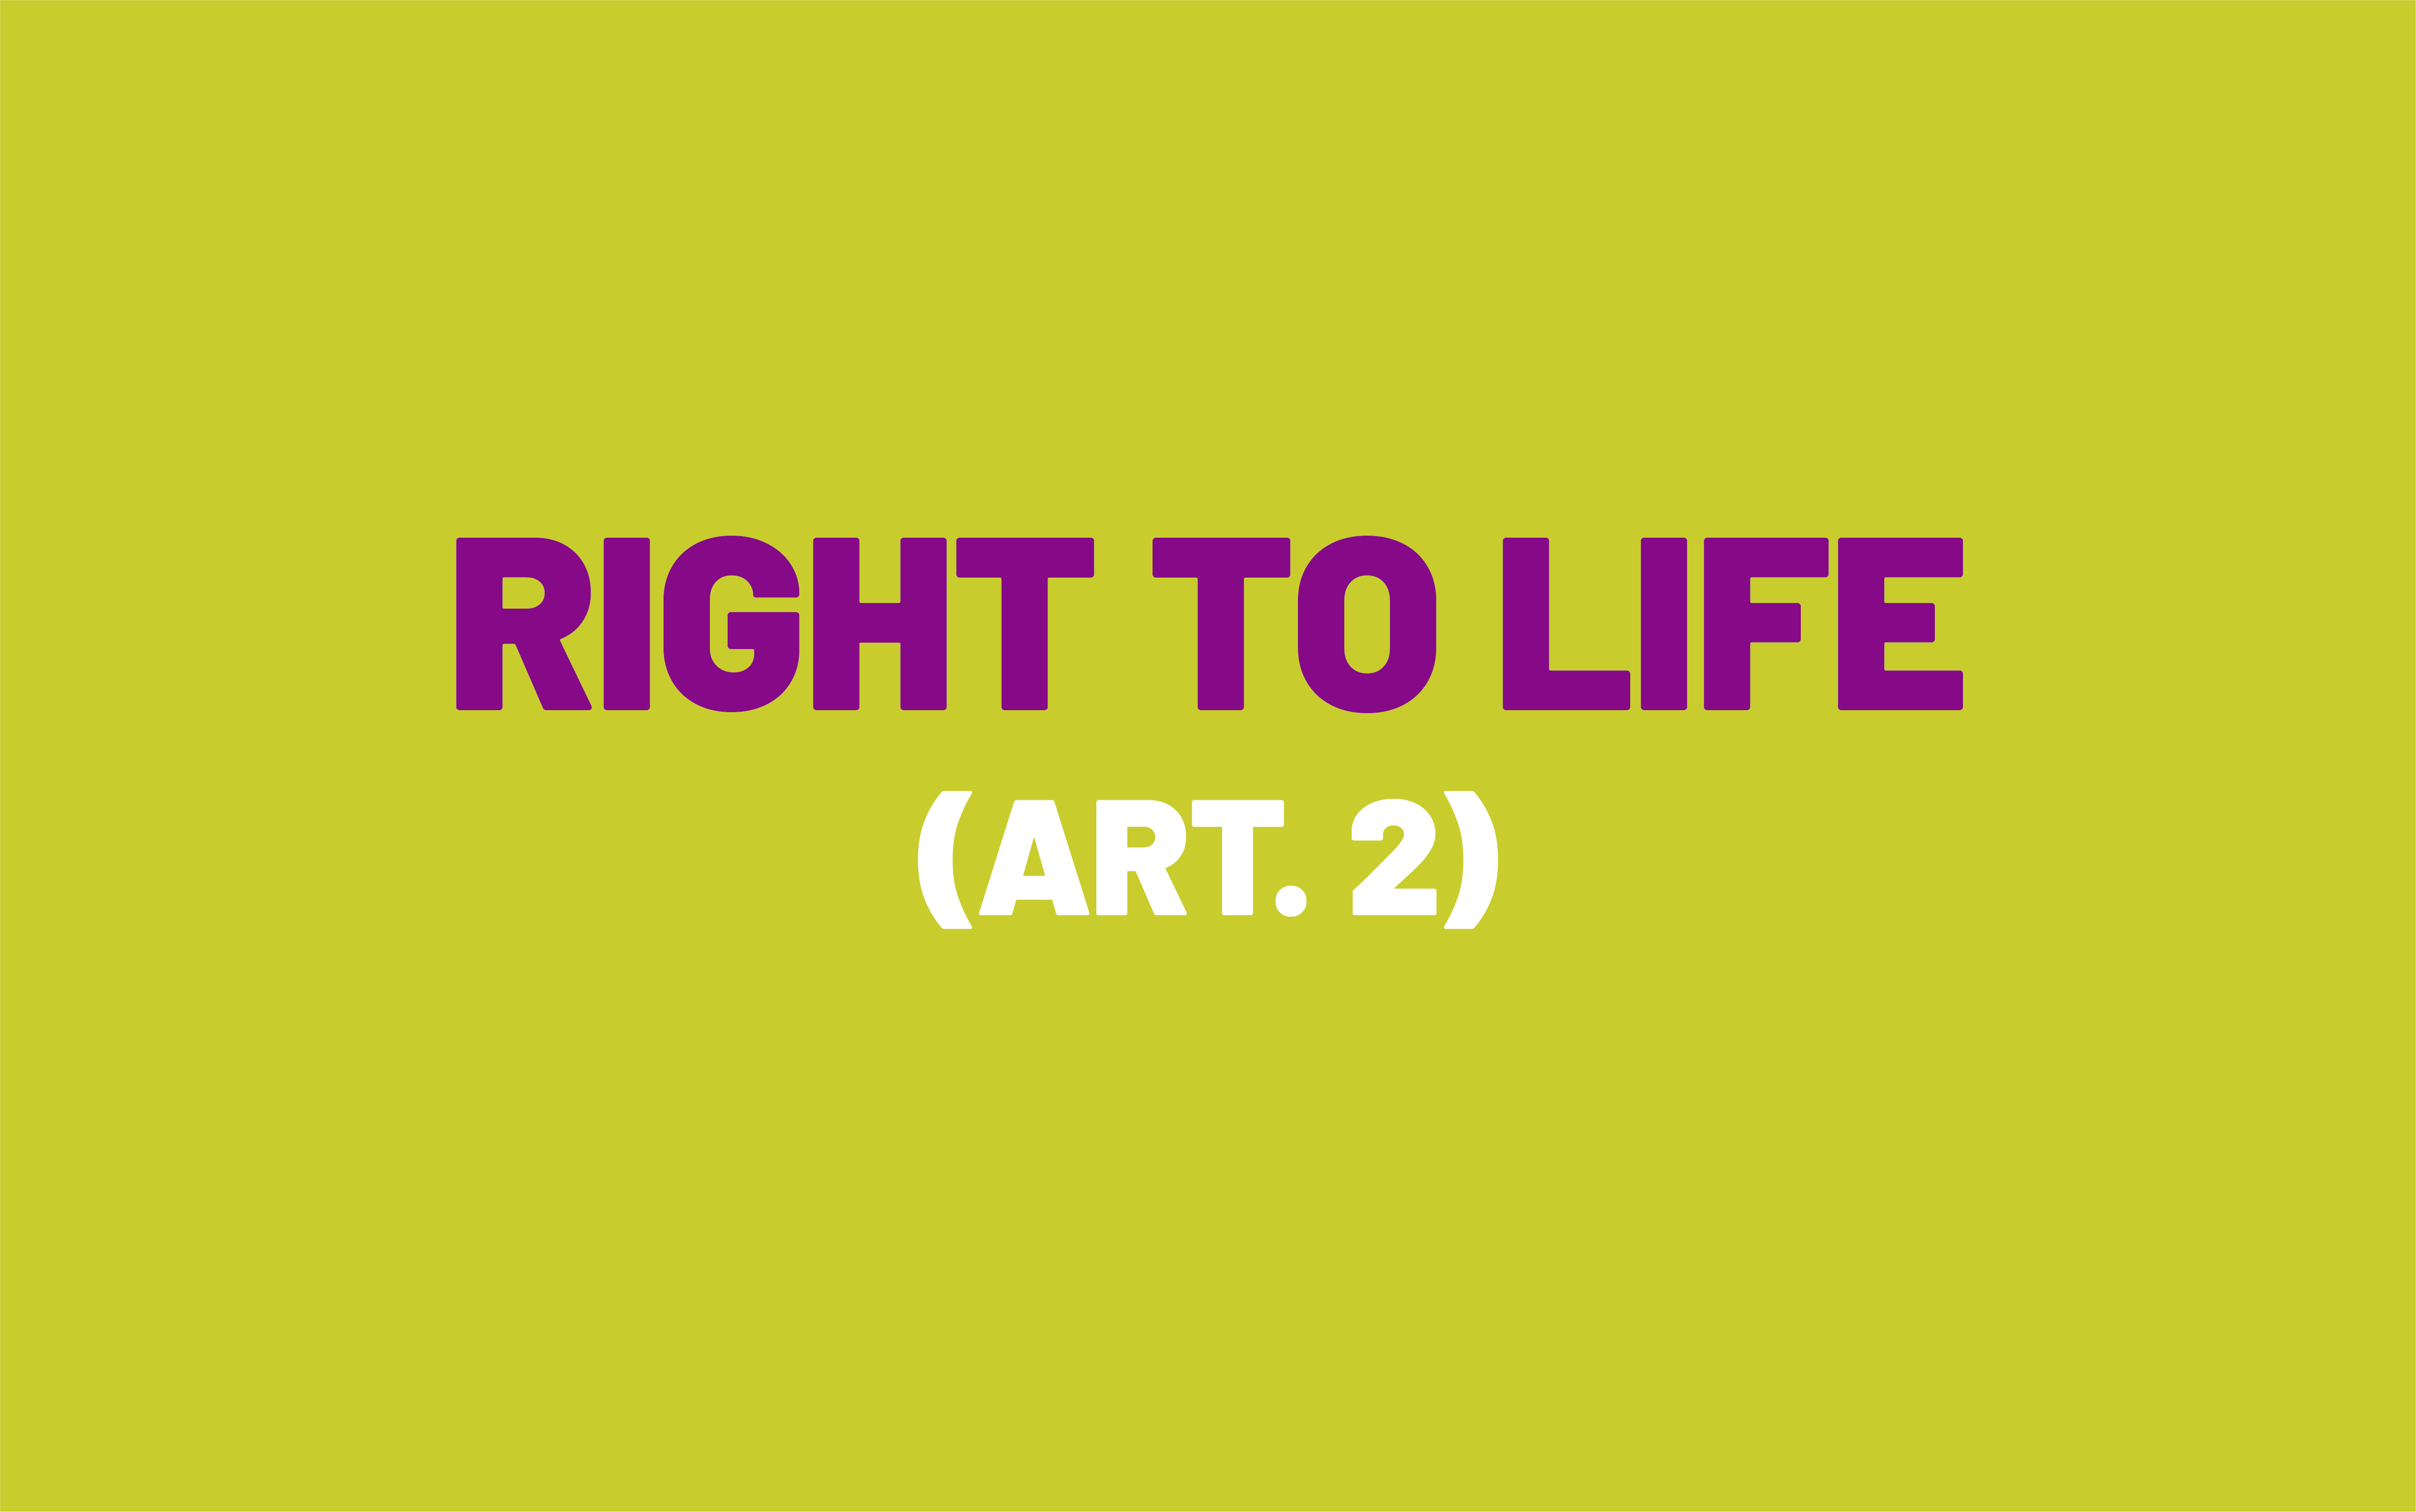 The picture consists of the wording of Article 2 of the European Convention on Human Rights, which is called the right to life.  